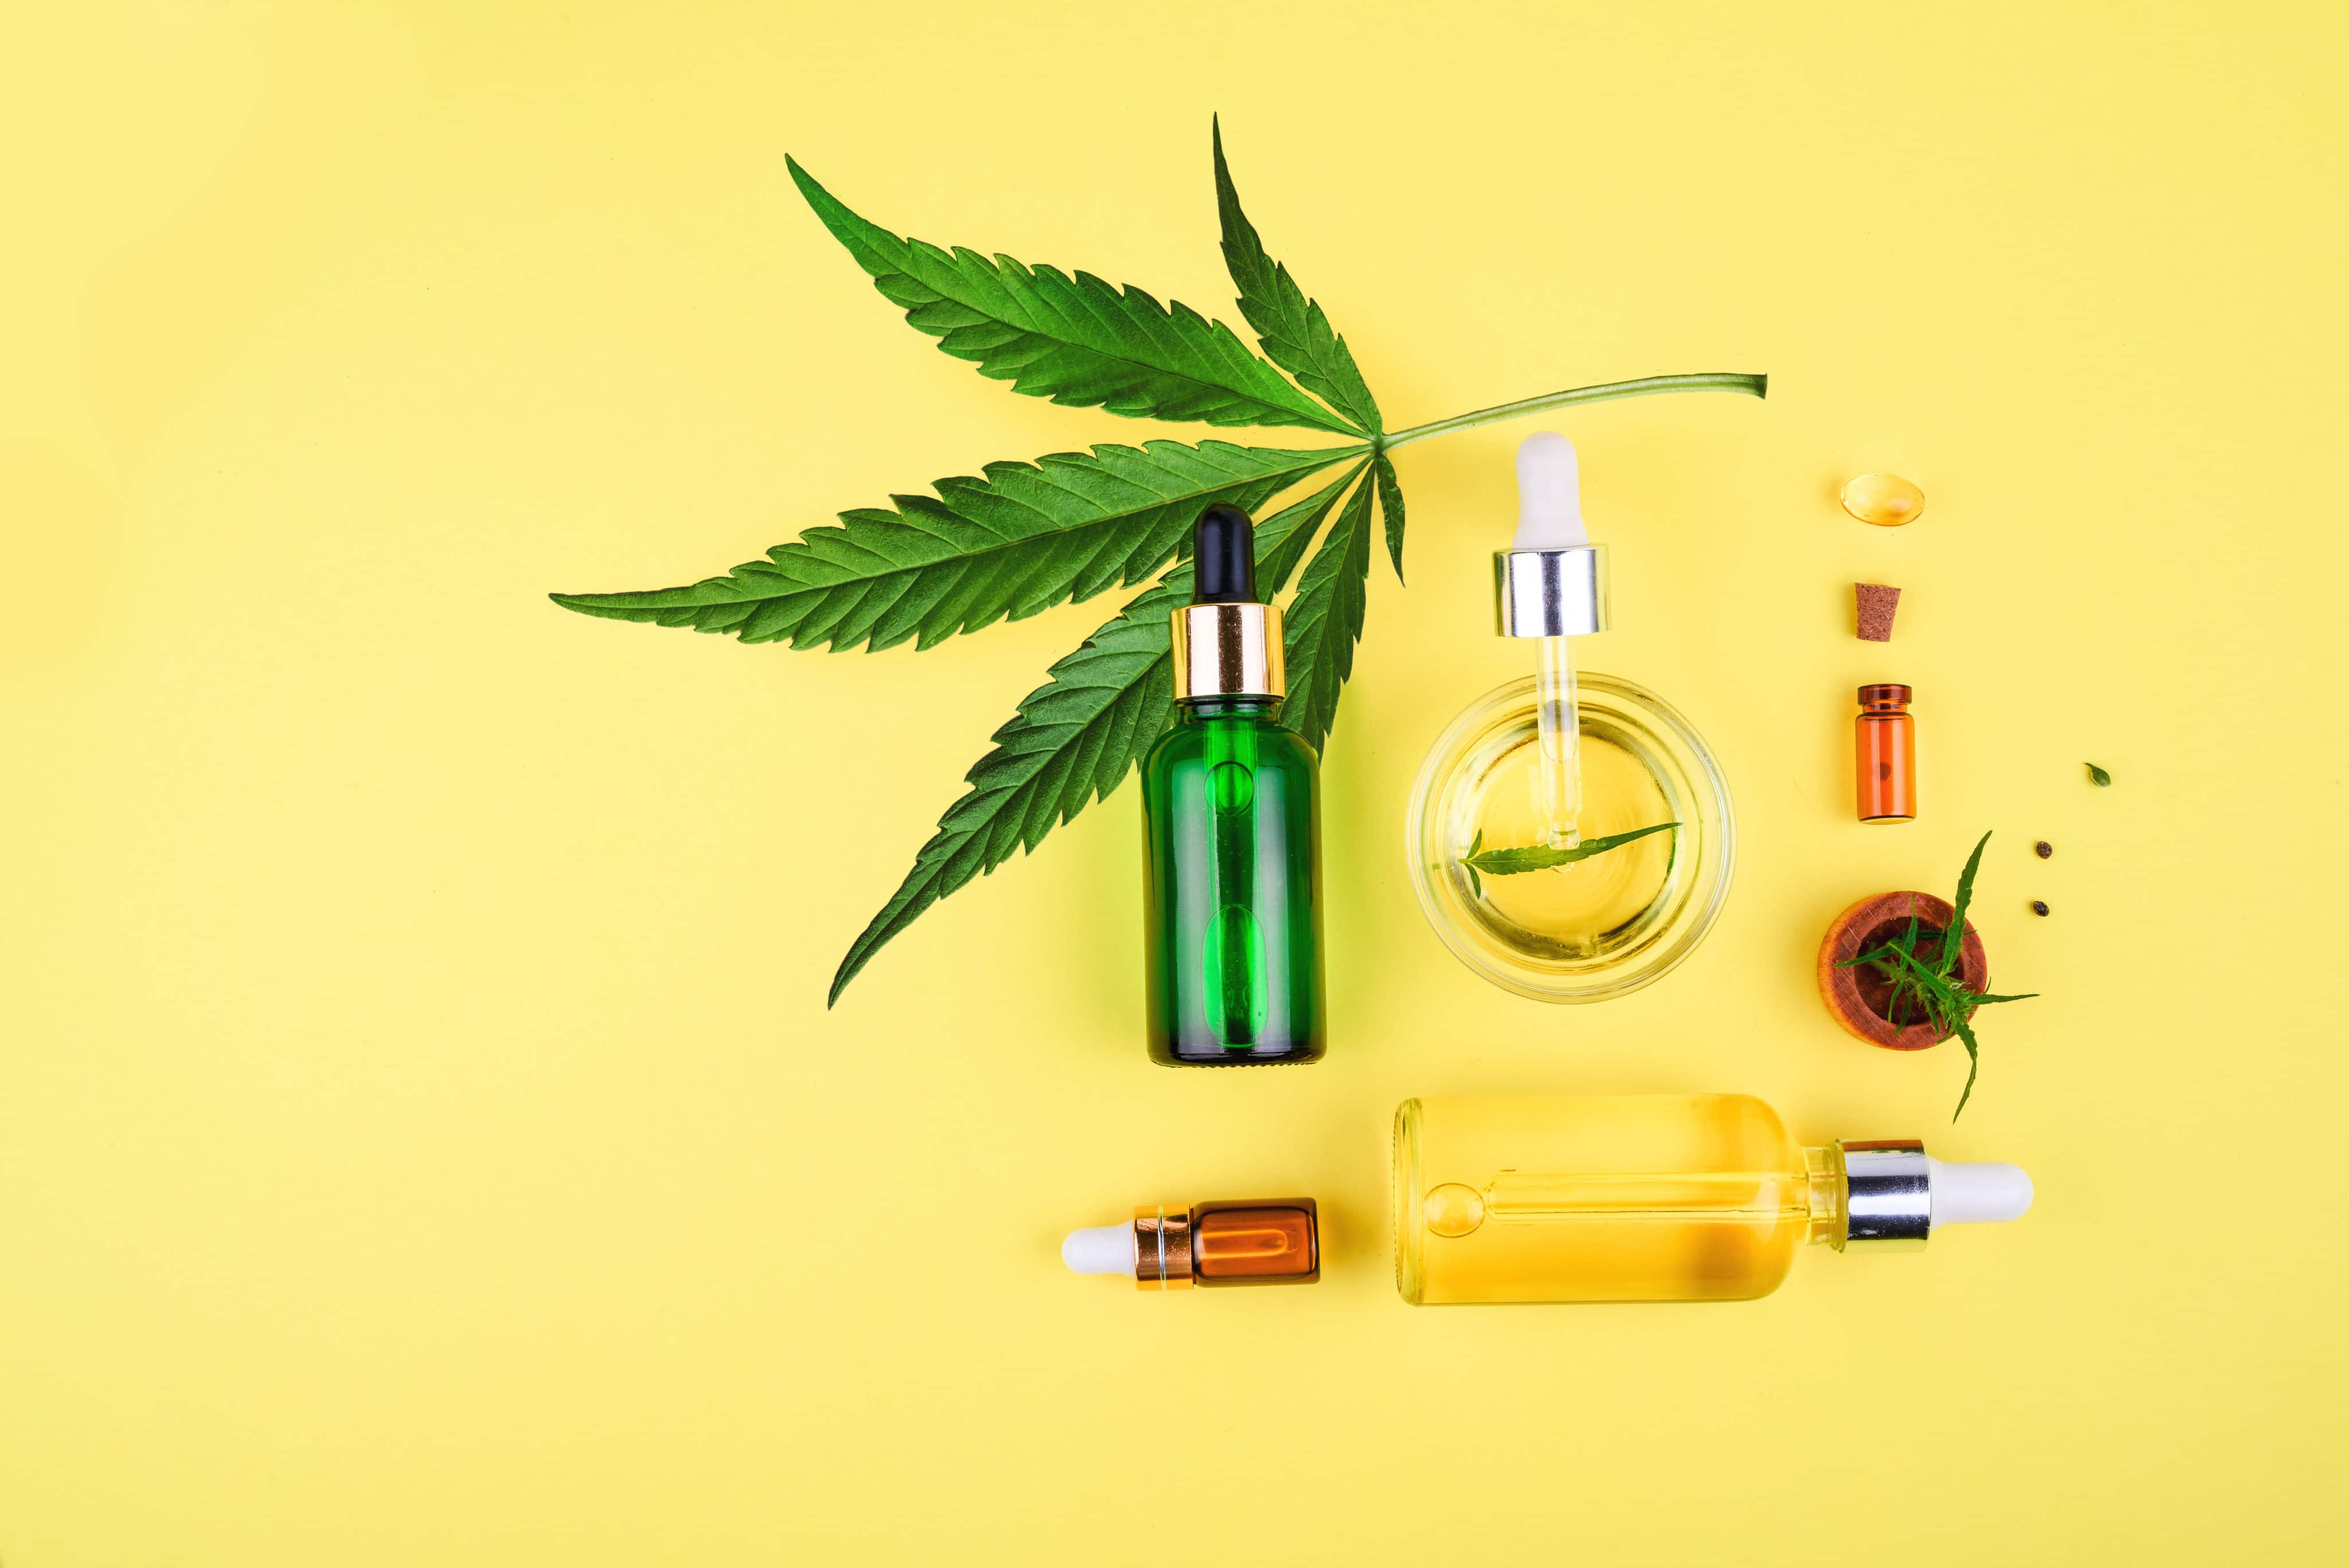 New Study Confirms Safety of CBD